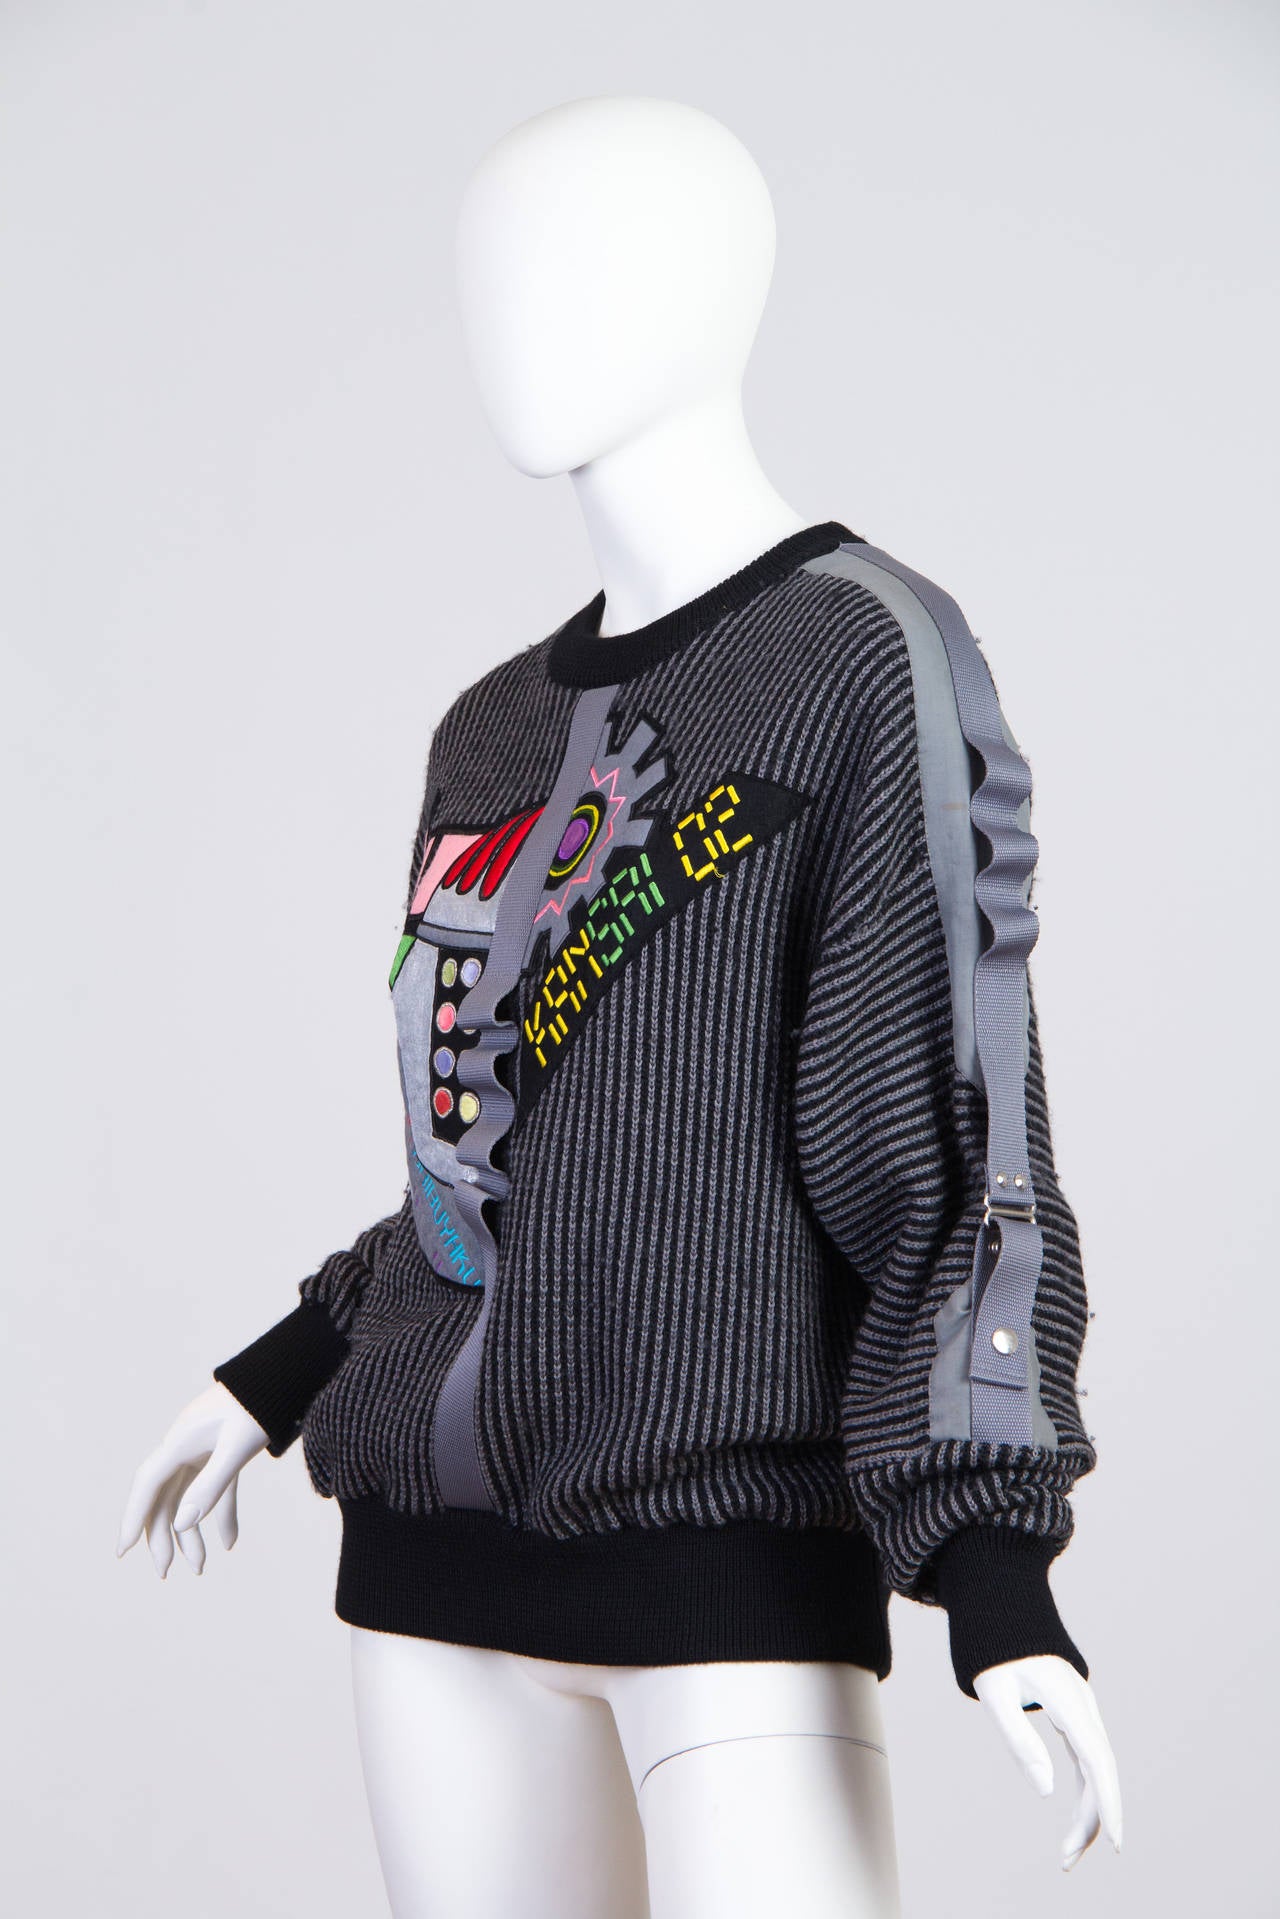 1980s computer graphics and pop motif applique sweater with pockets, straps and other assorted bells and whistles which mark this as a one and only Kansai Yammamoto original.